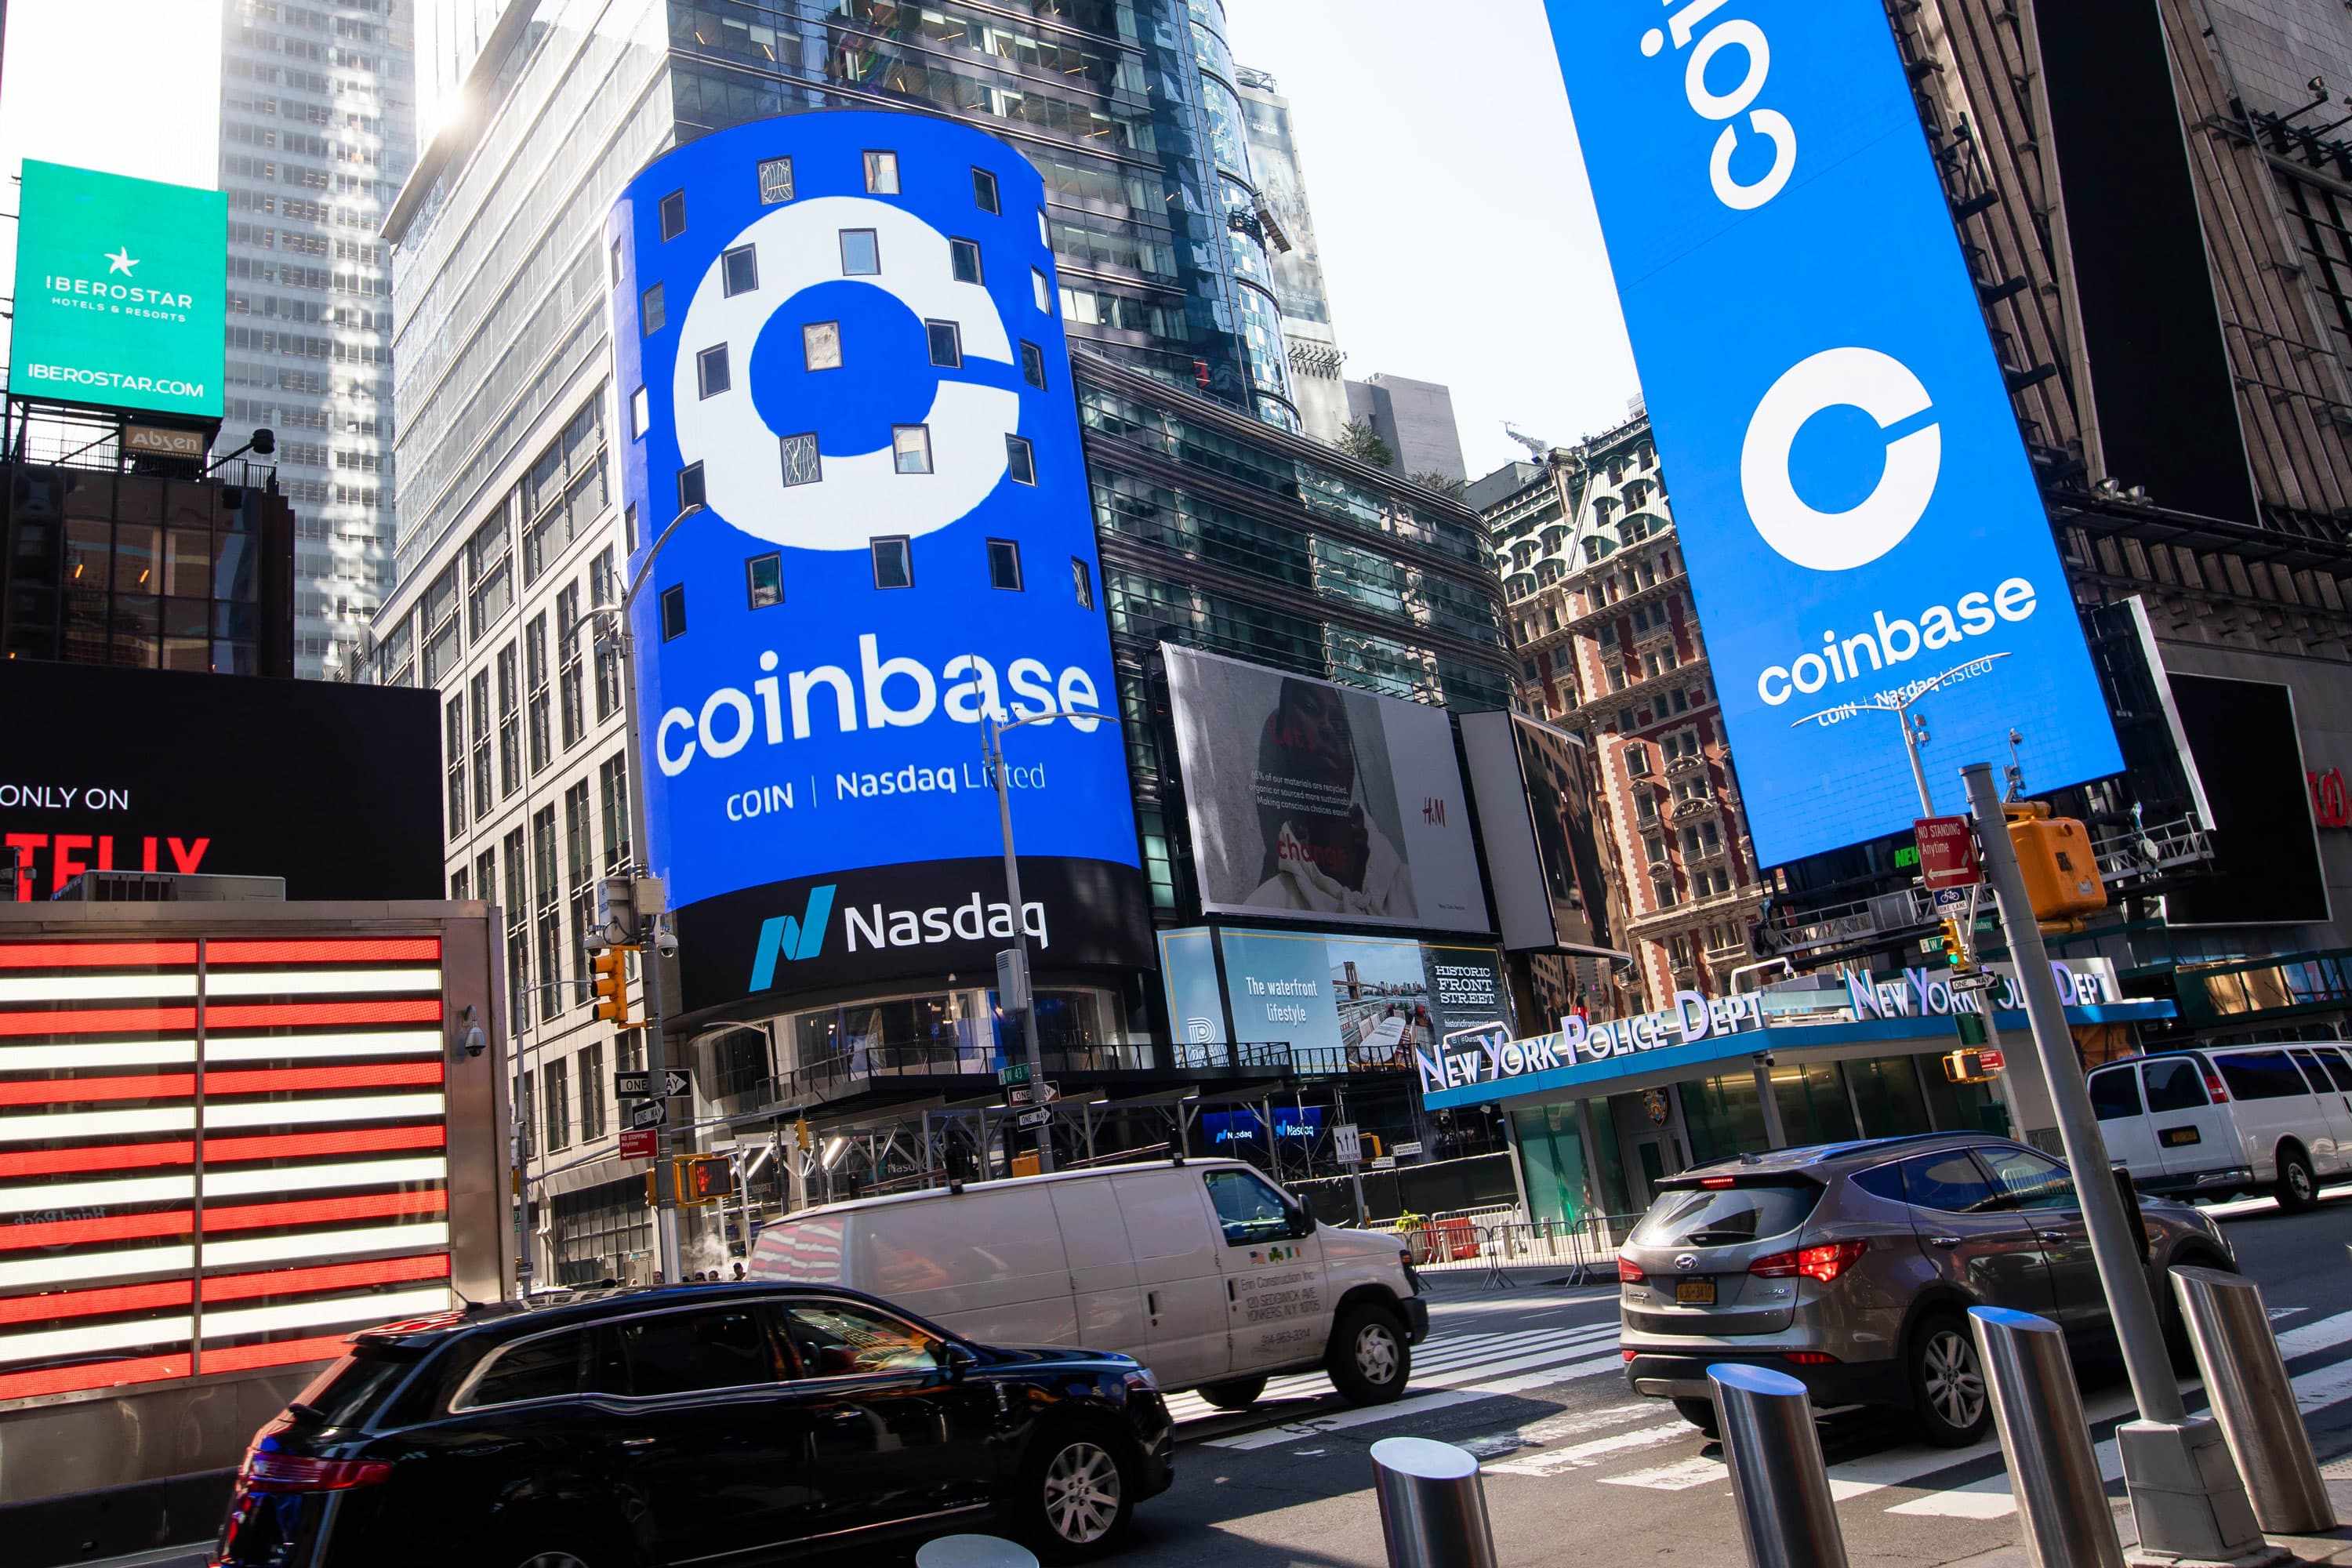 coinbase union square debut early